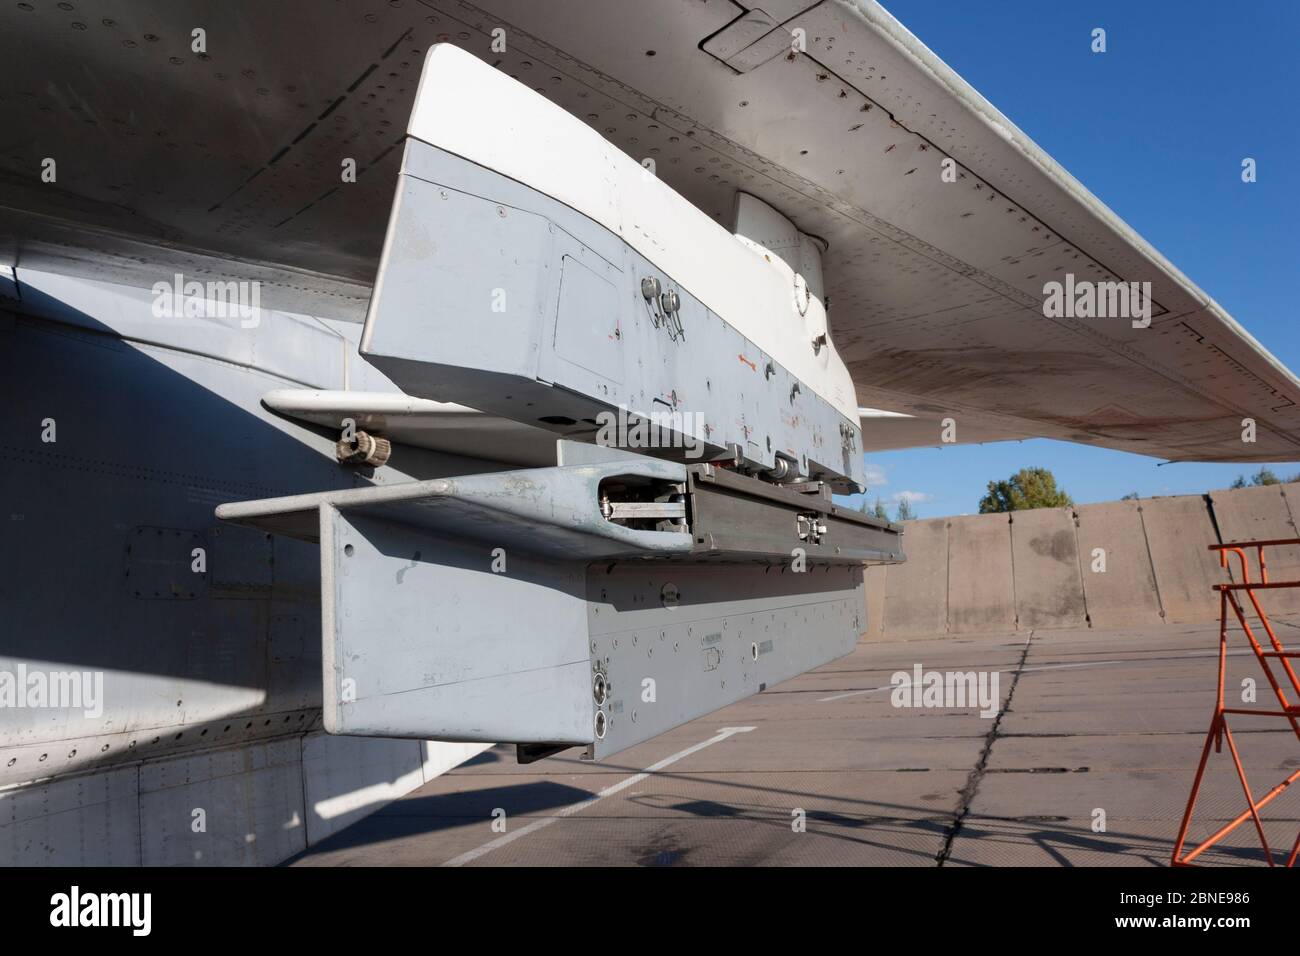 Pylon under the wing of a military aircraft for hanging missiles and bombs. Stock Photo